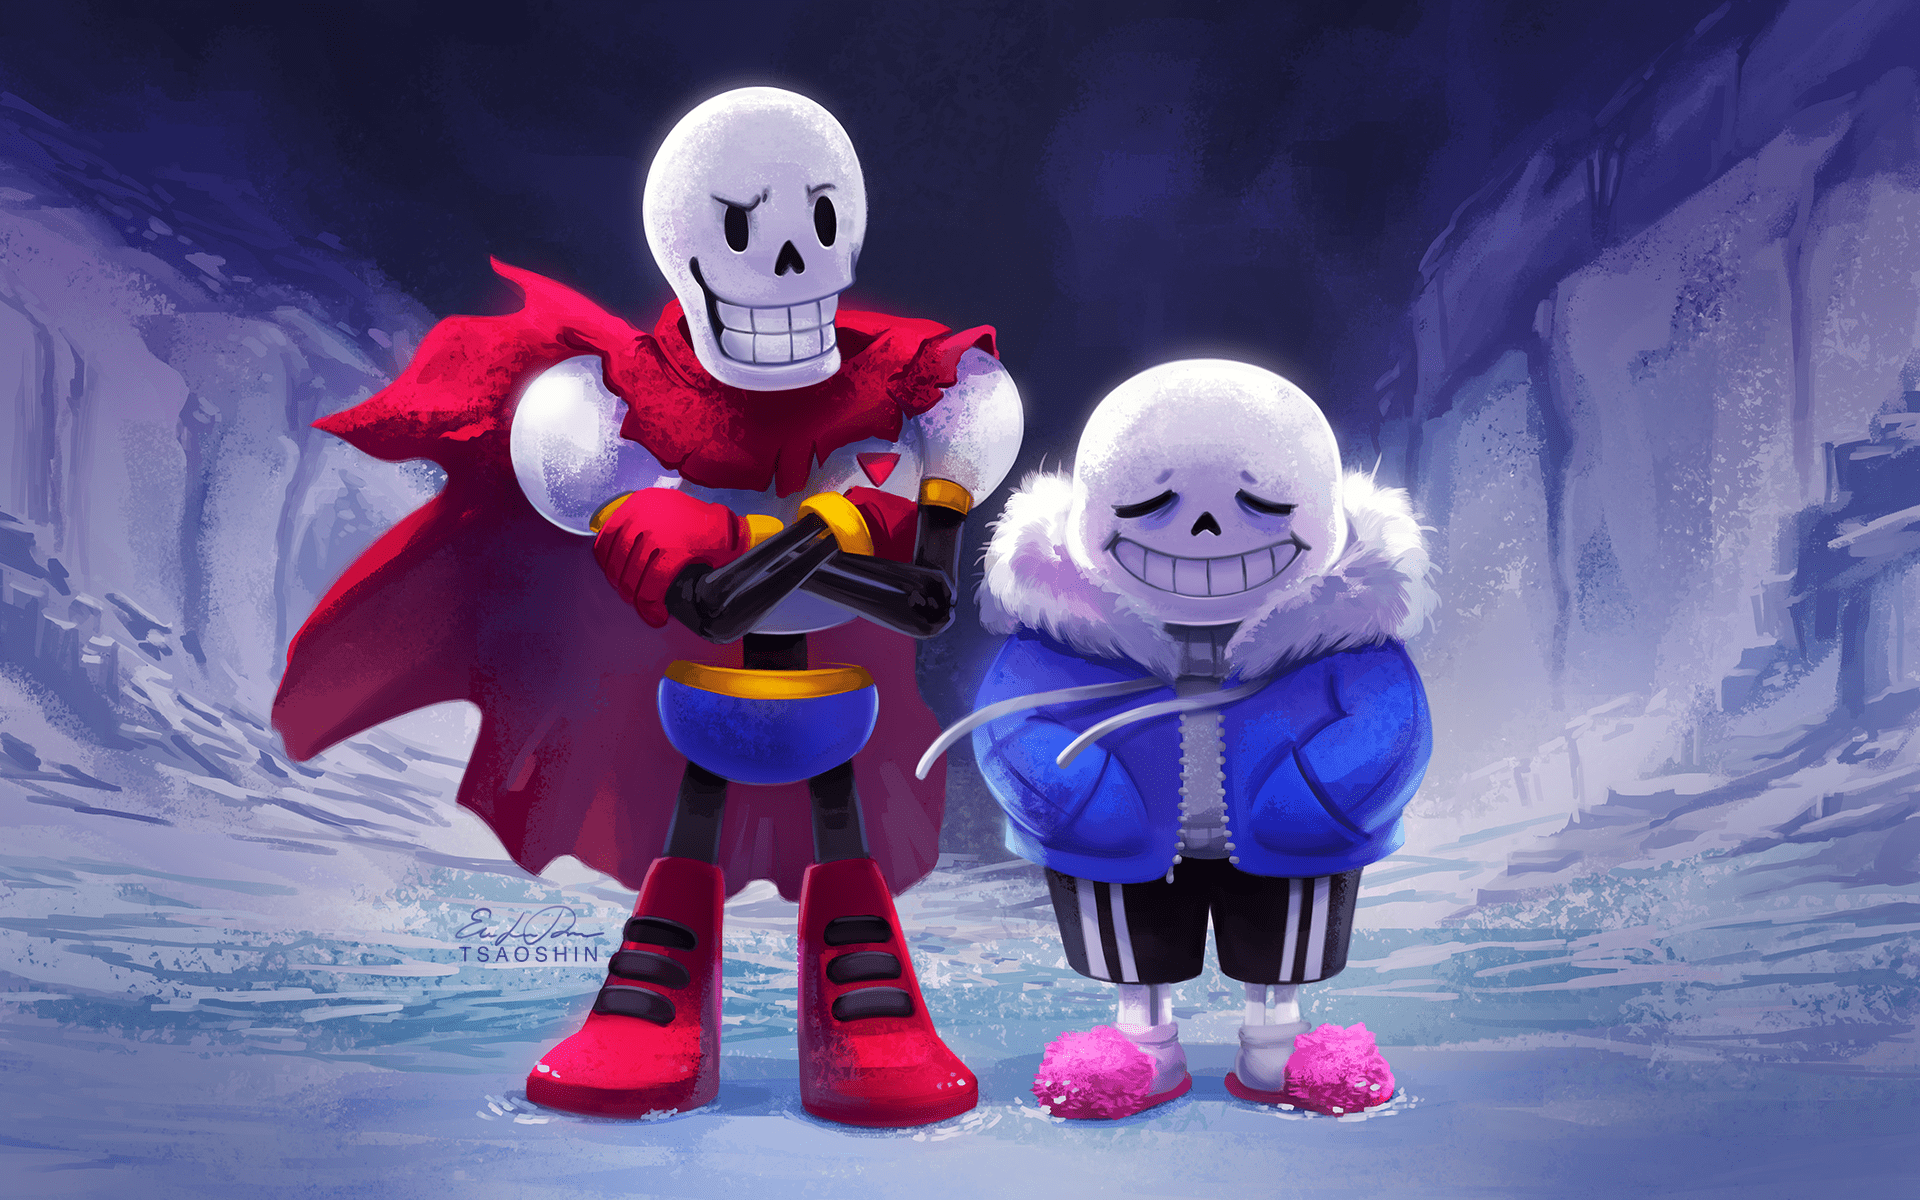 Sans and Papyrus Wallpapers - Top Free